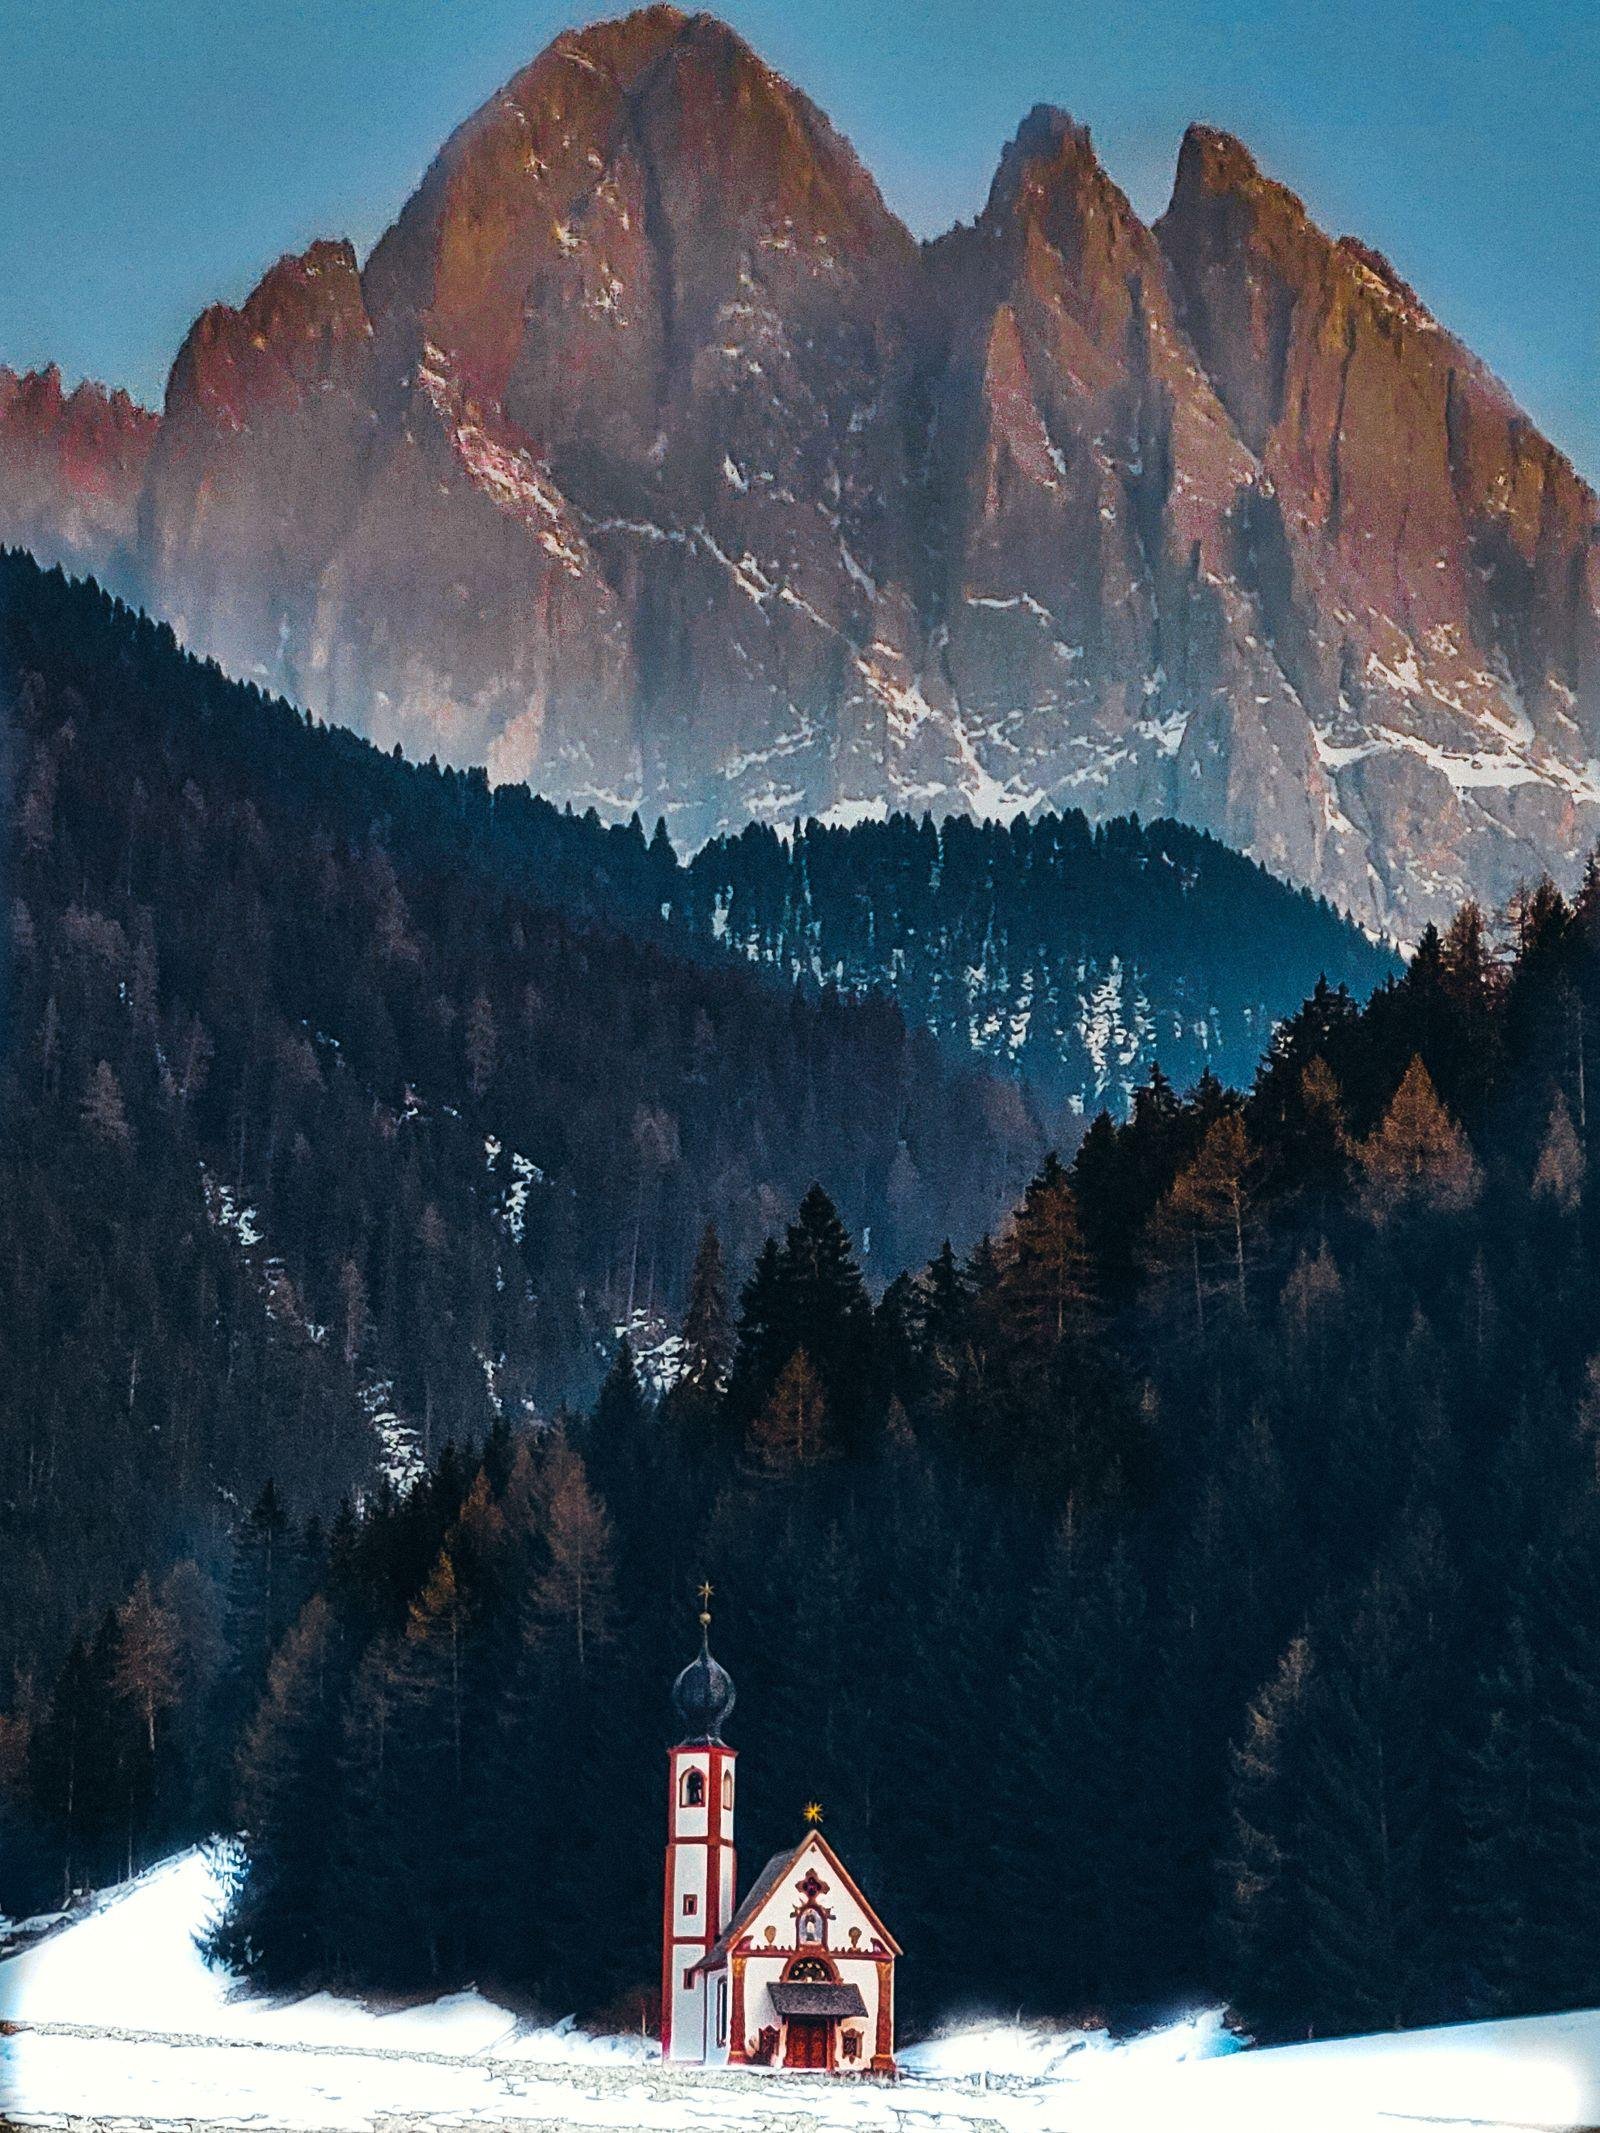 An old red and white church set in the snow with pine tree coved hills in the background and the jagged mountains of the Dolomites in the distance